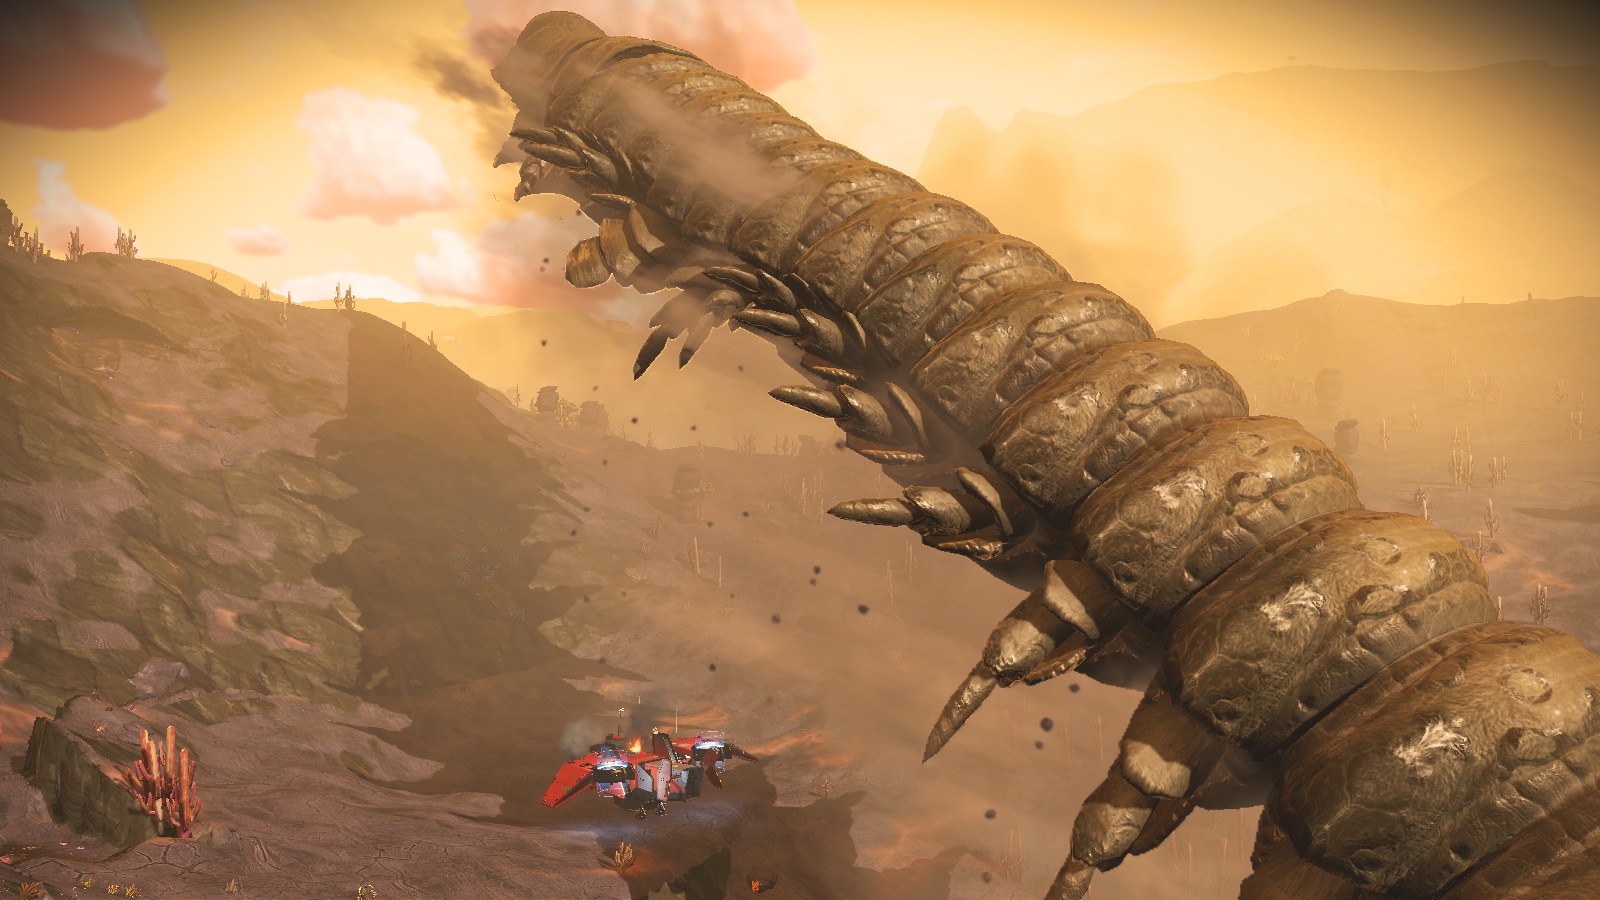 No Man's Sky, Expedition 4: Emergence, a giant sandworm leaps out of the ground and flies across a yellow sky above a dusty brown desert landscape.